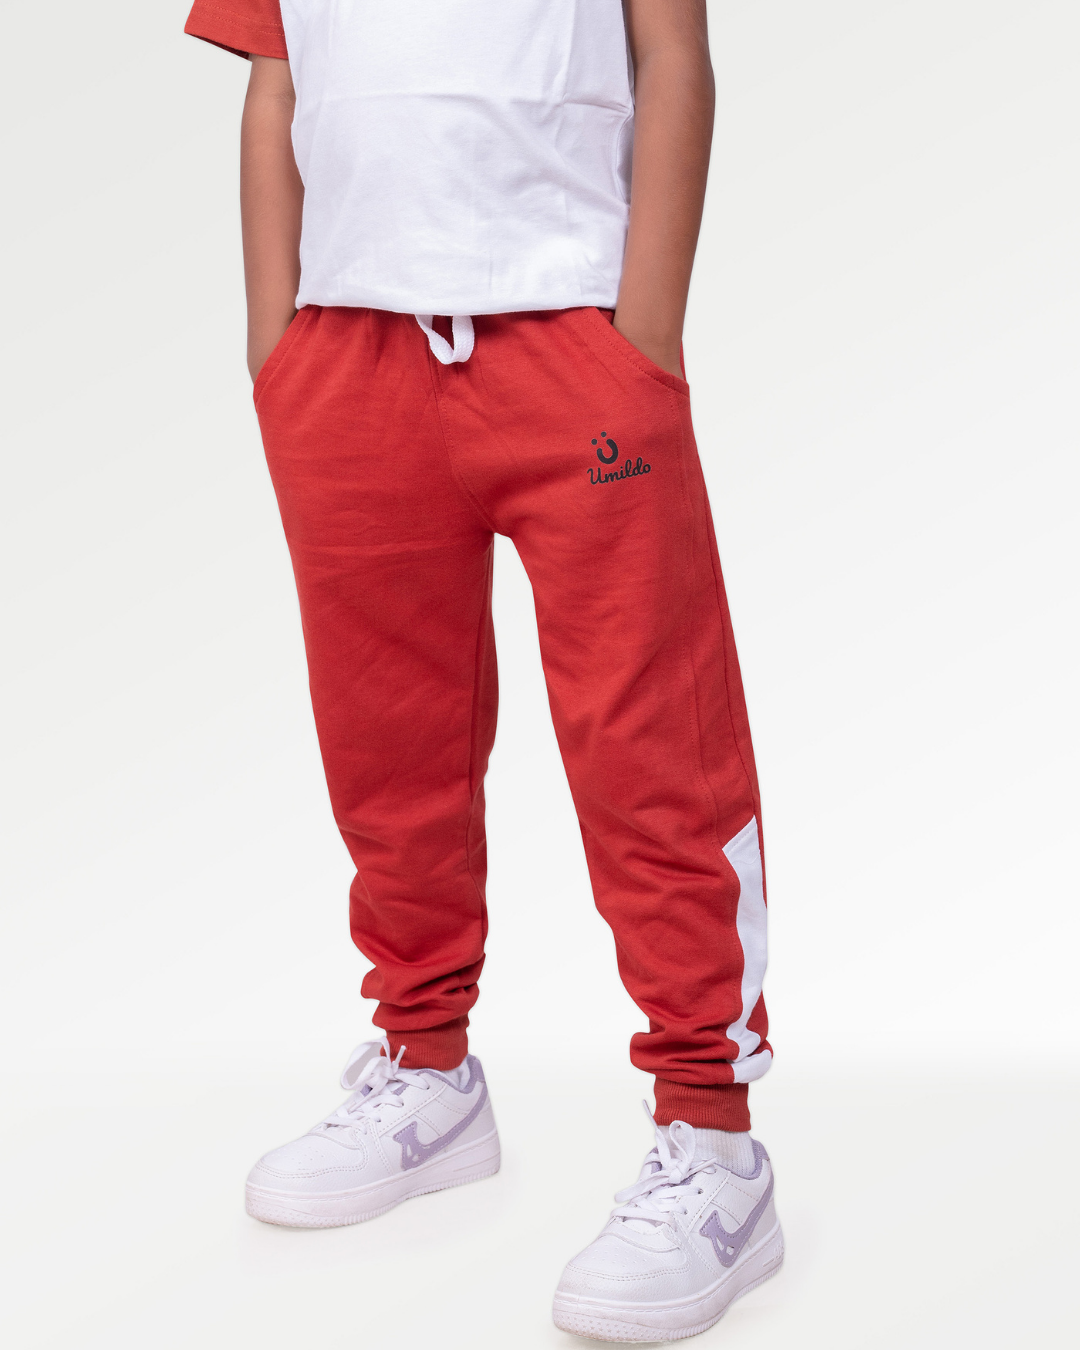 RUSTIC RED JOGGERS SET